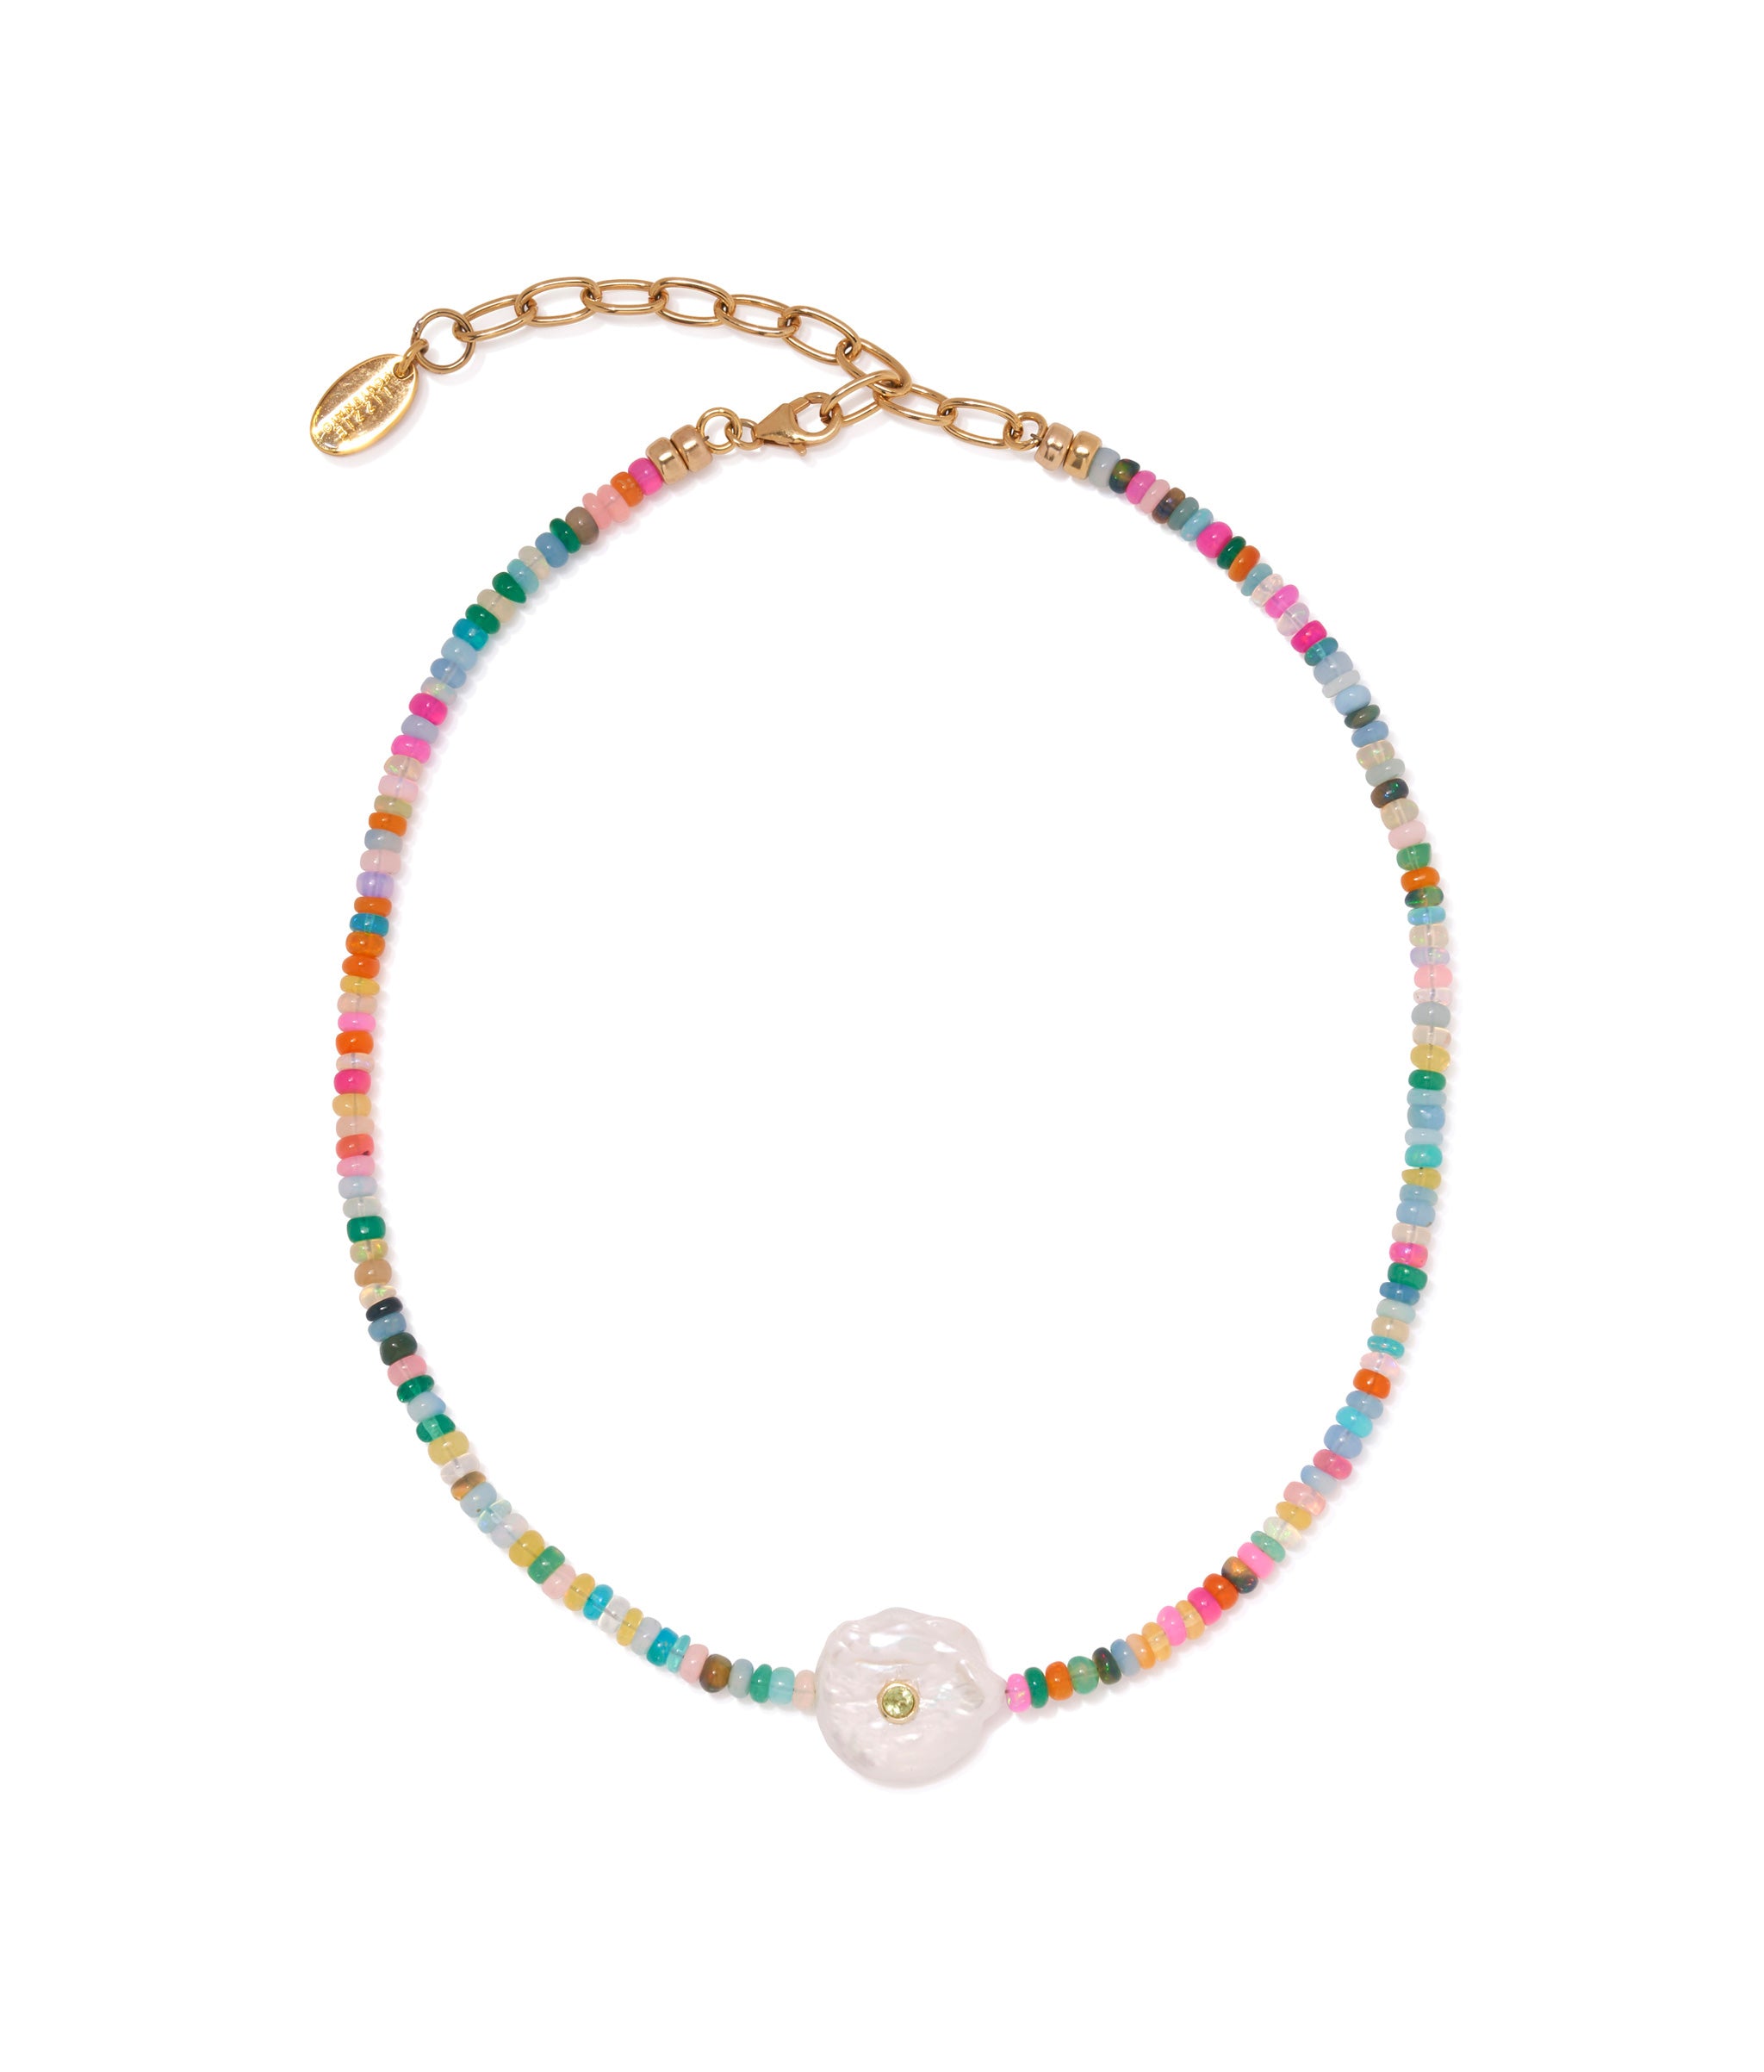 Destination Necklace in Rainbow Opal. Features gold-plated brass, Ethiopian opals, freshwater pearl and peridot.